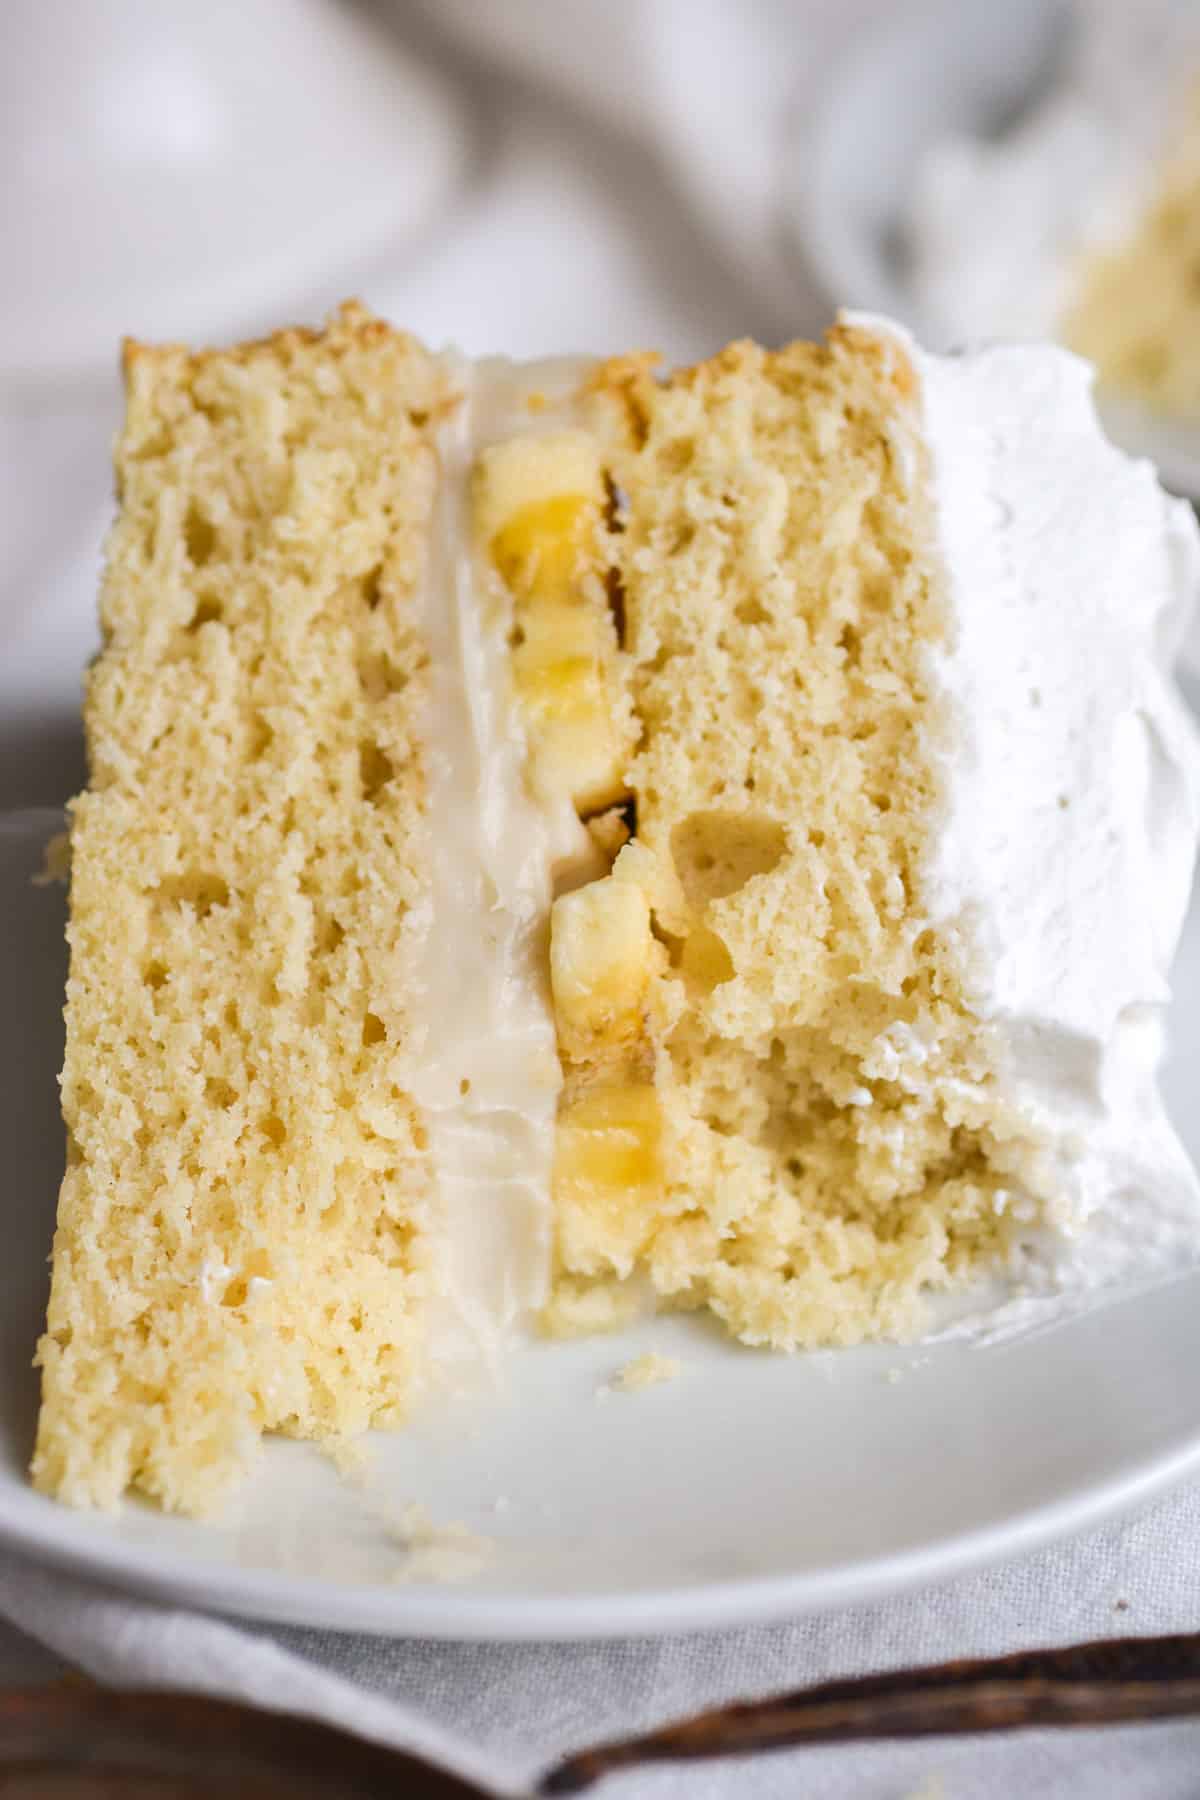 A slice of cake with the non-dairy vegan pastry cream custard in the middle of the cake layers.